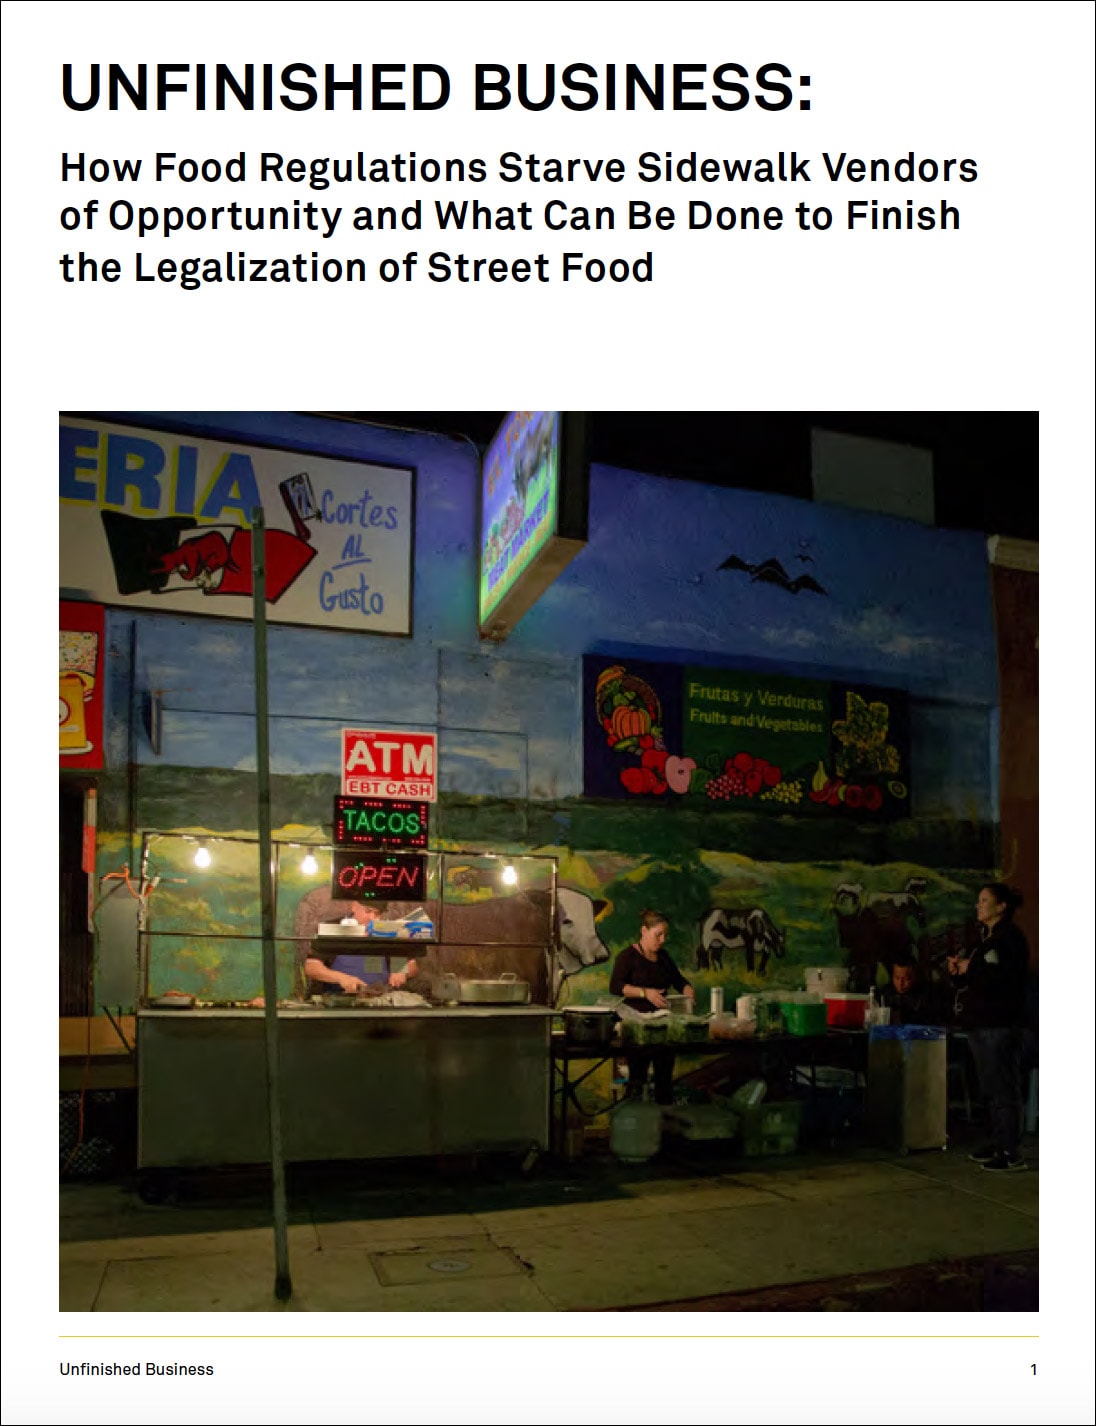 Unfinished Business: How Food Regulations Starve Sidewalk Vendors of Opportunity and What Can Be Done to Finish the Legalization of Street Food (2001) - local government